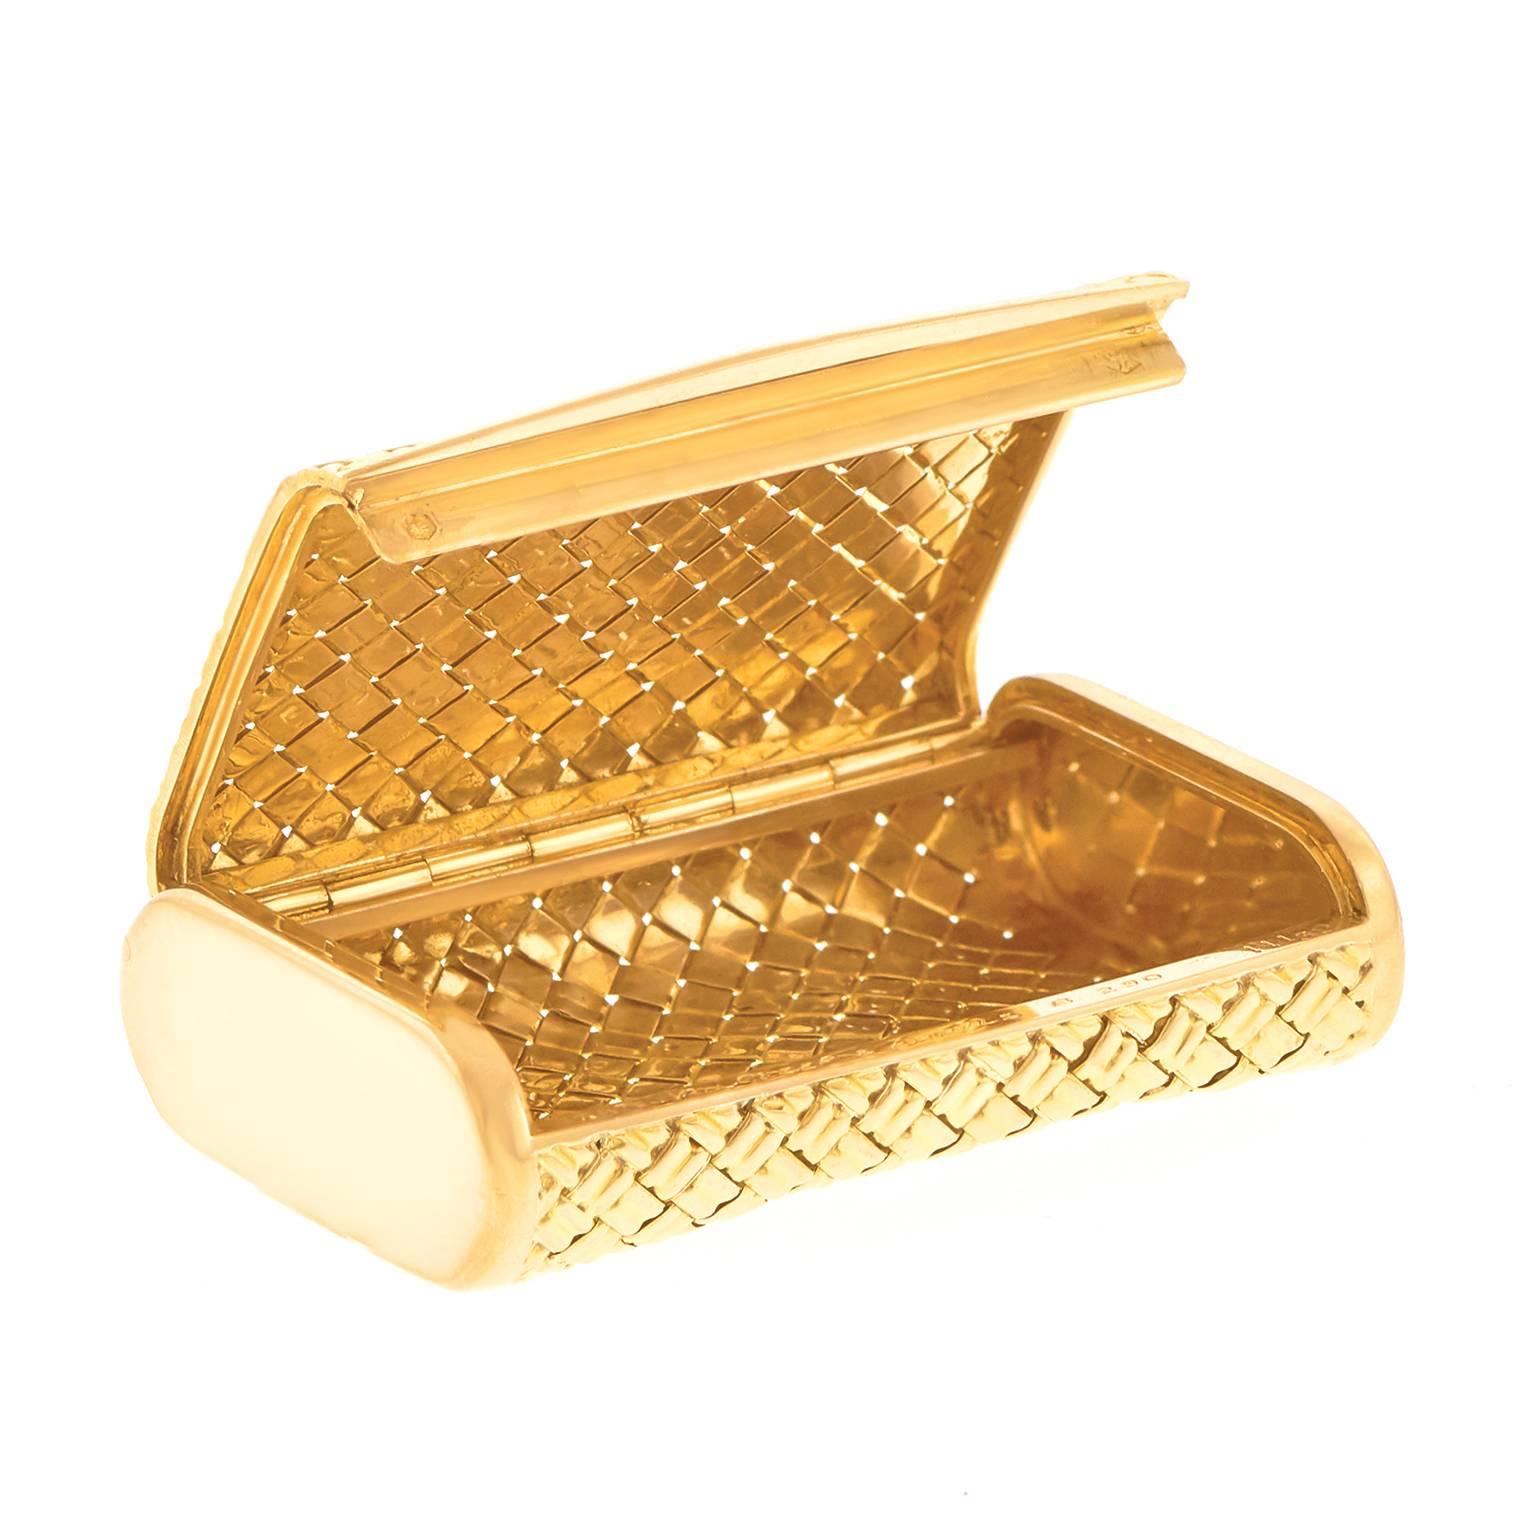 French Van Cleef and Arpels Oversized Gold Pillbox